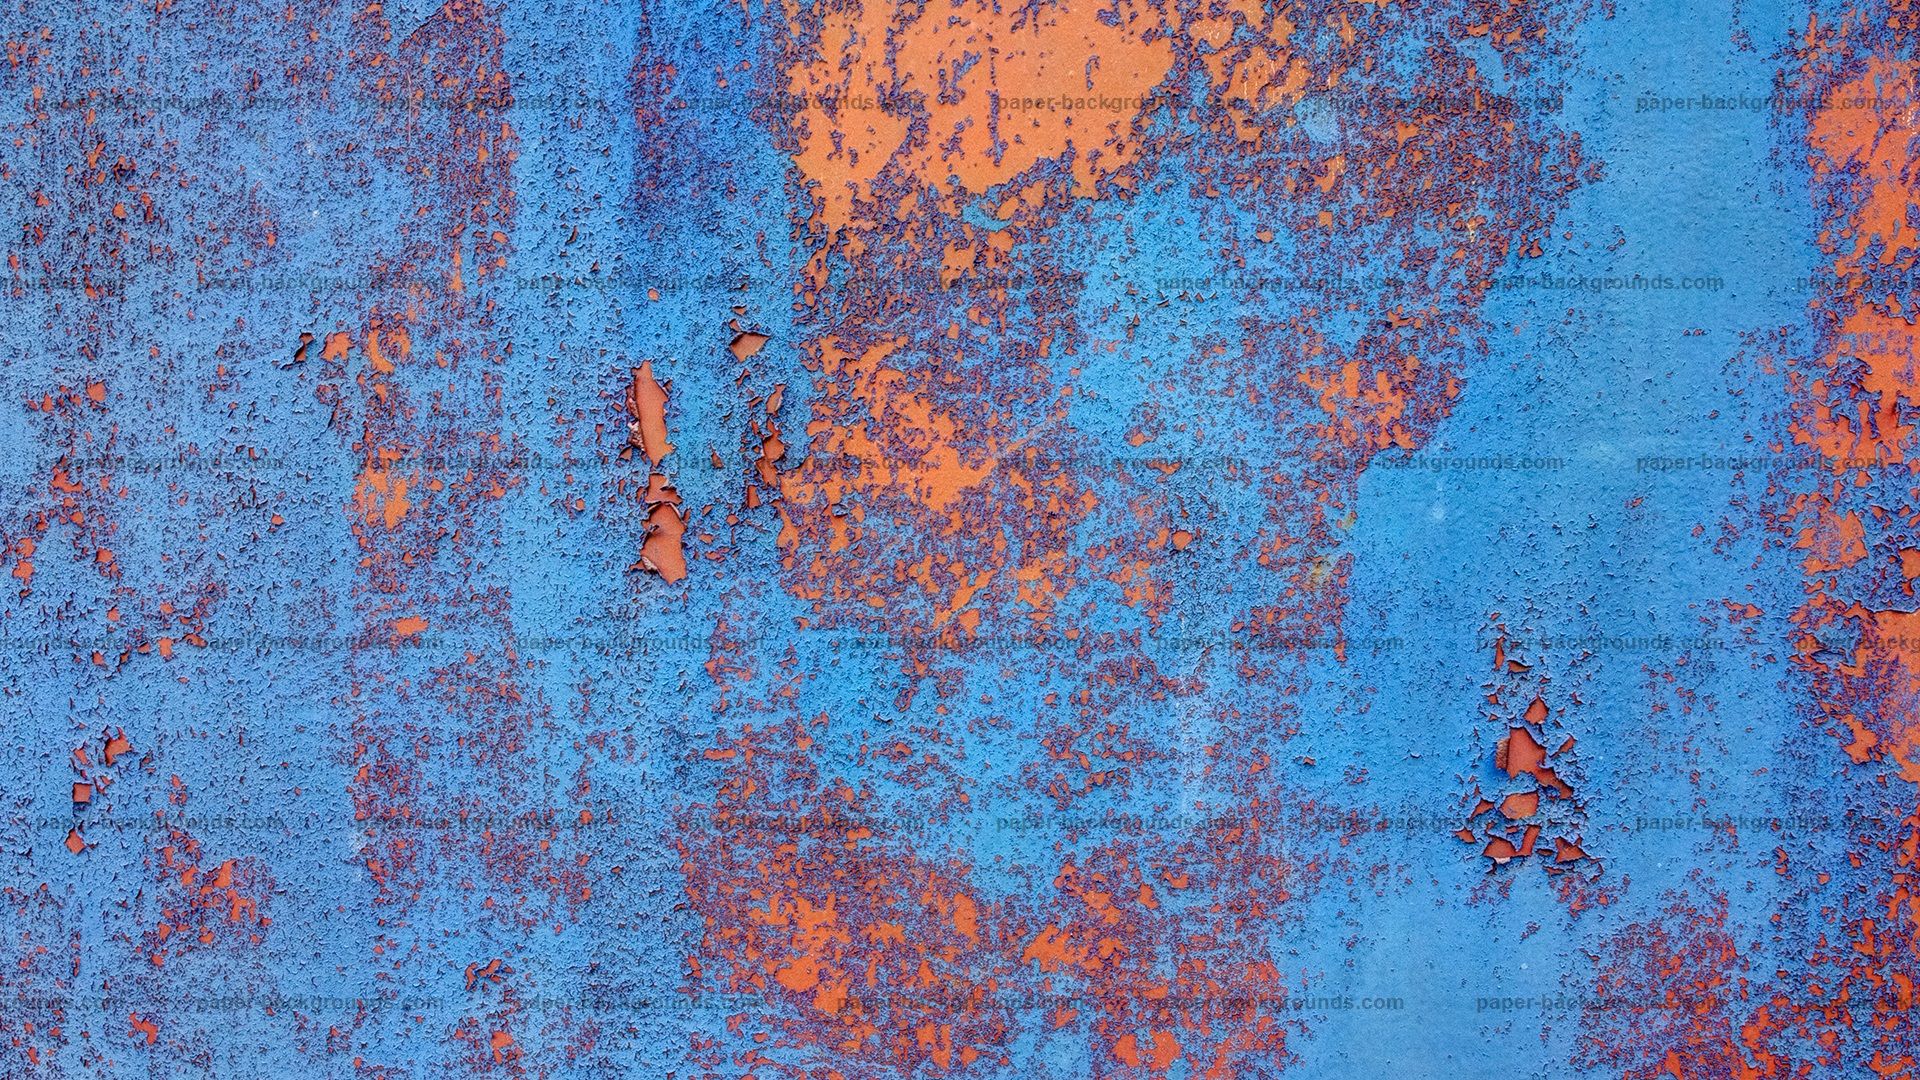 Blue Orange Rugged Rusty Metal Texture HD | Paper Backgrounds ...